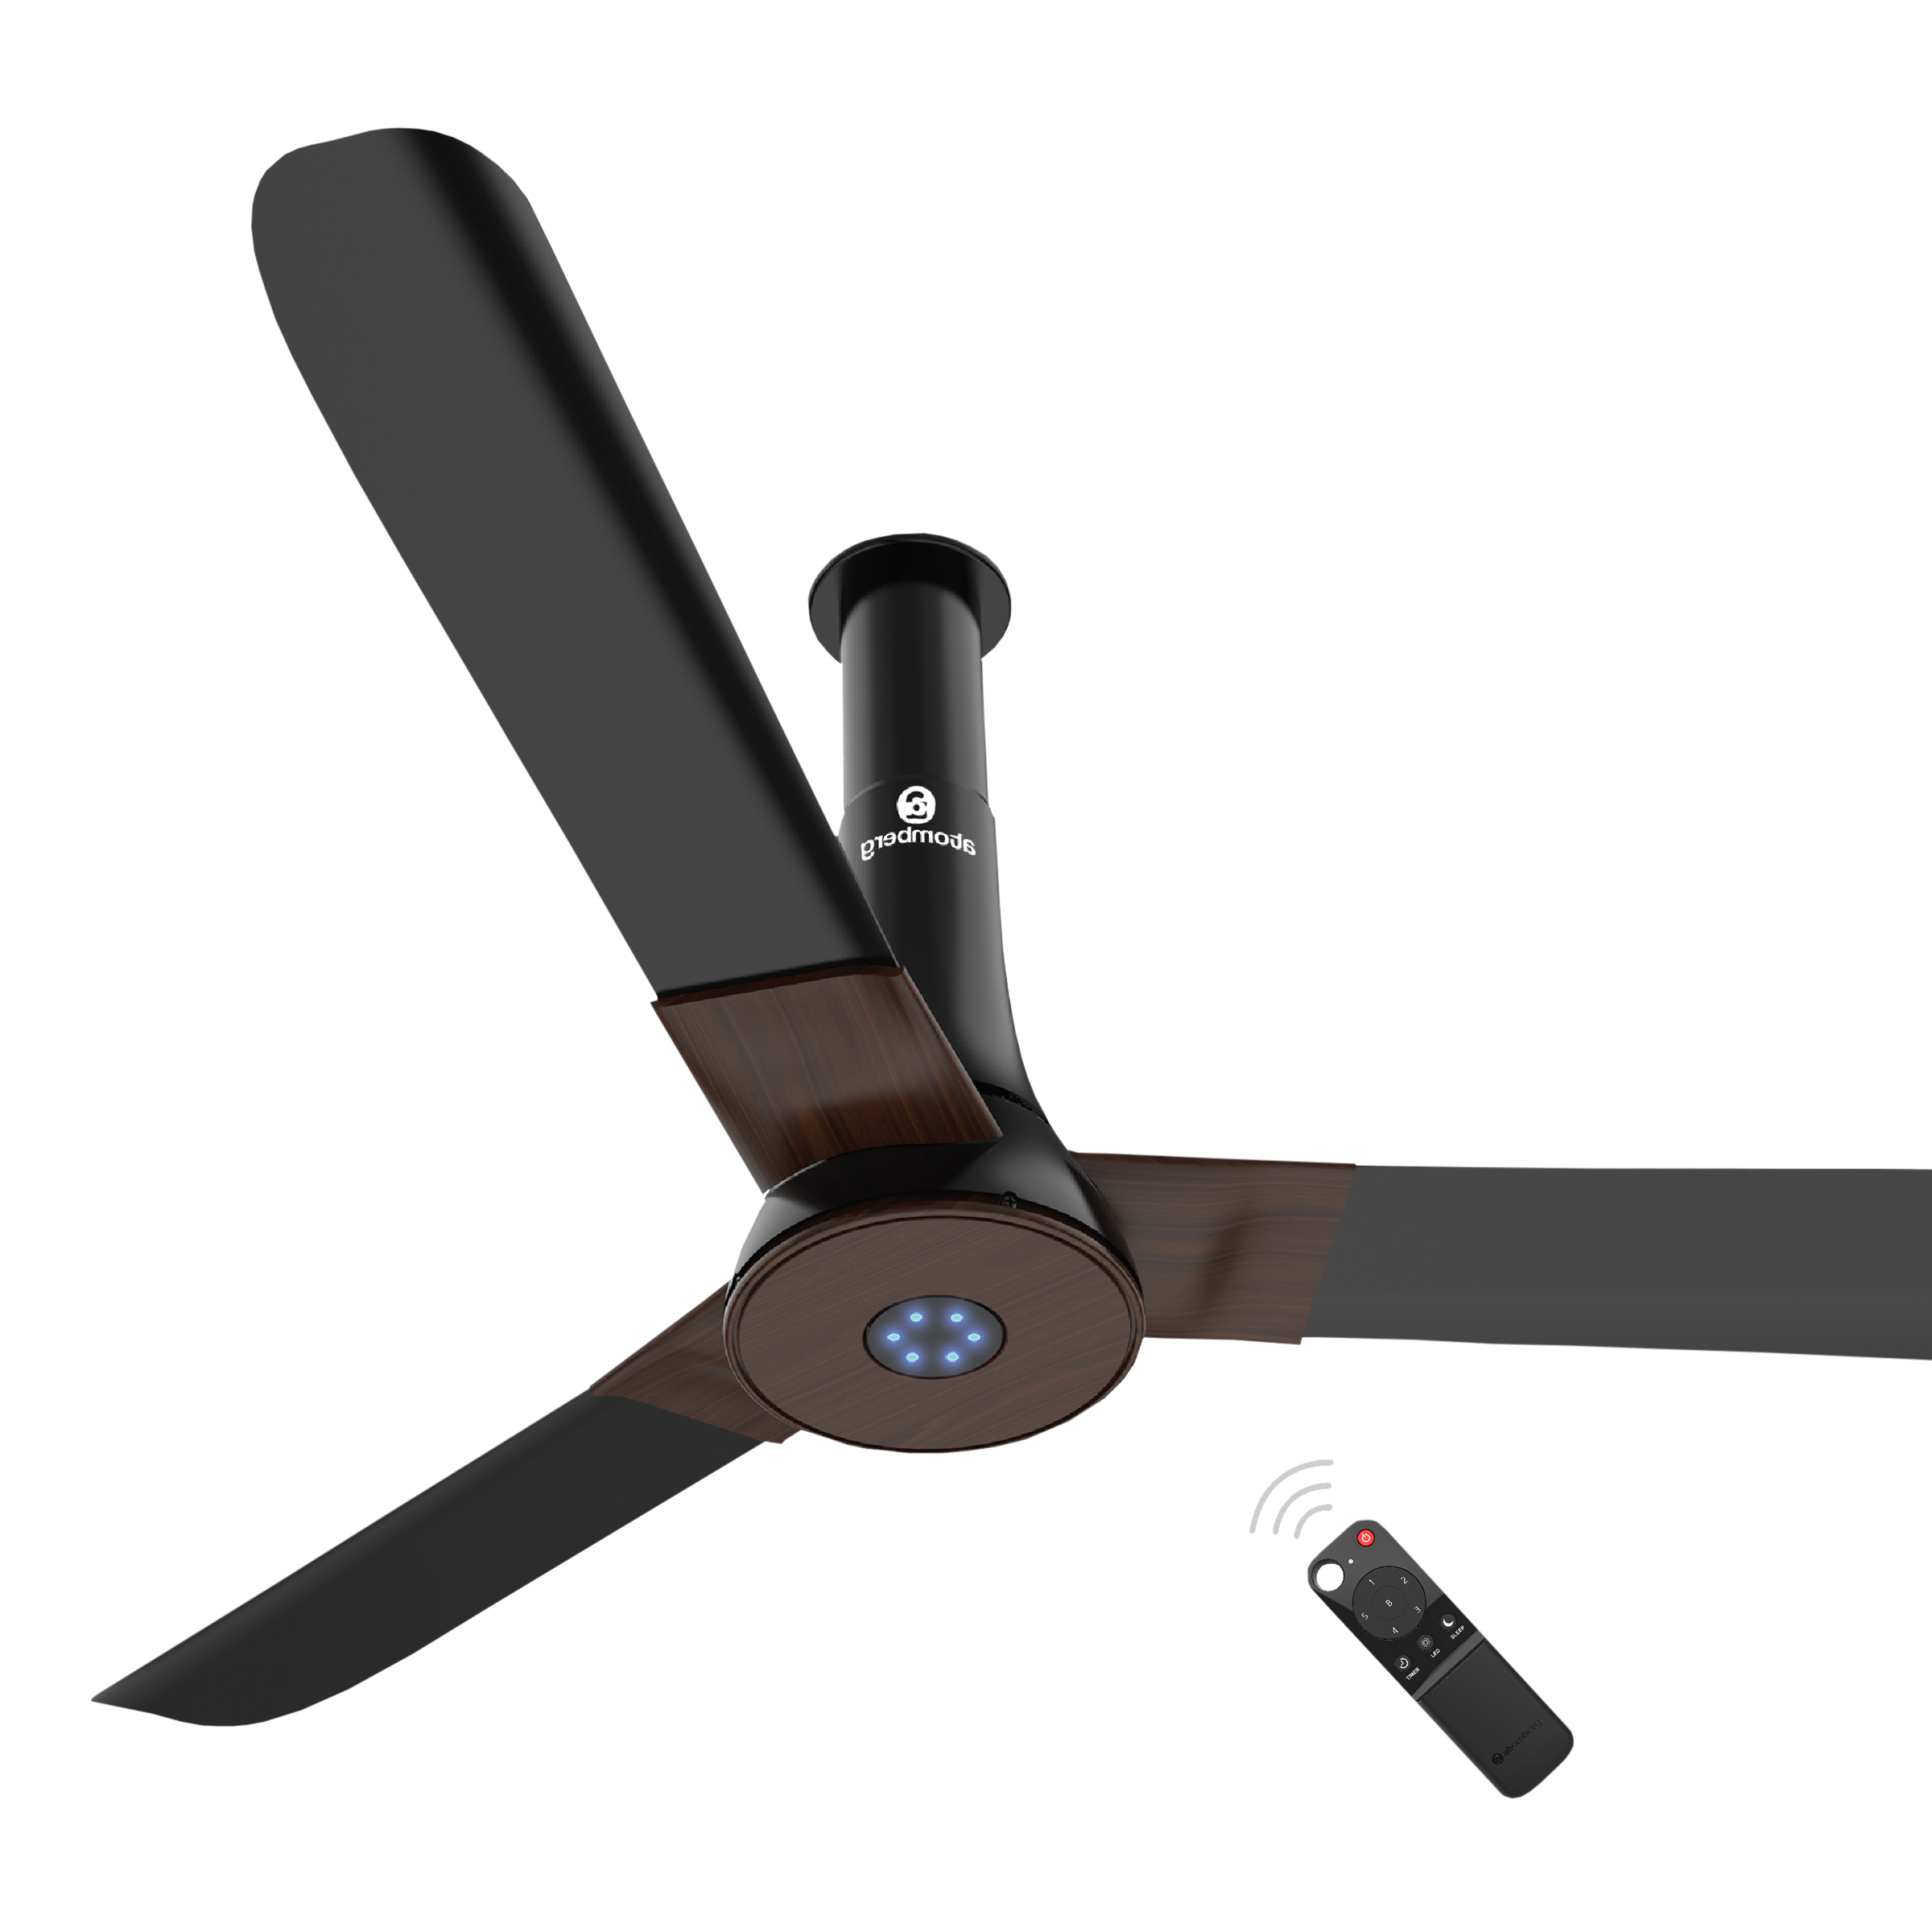 atomberg Studio Plus 1200mm 3 Blade BLDC Motor Ceiling Fan with Remote (LED Indicator, Earth Brown)